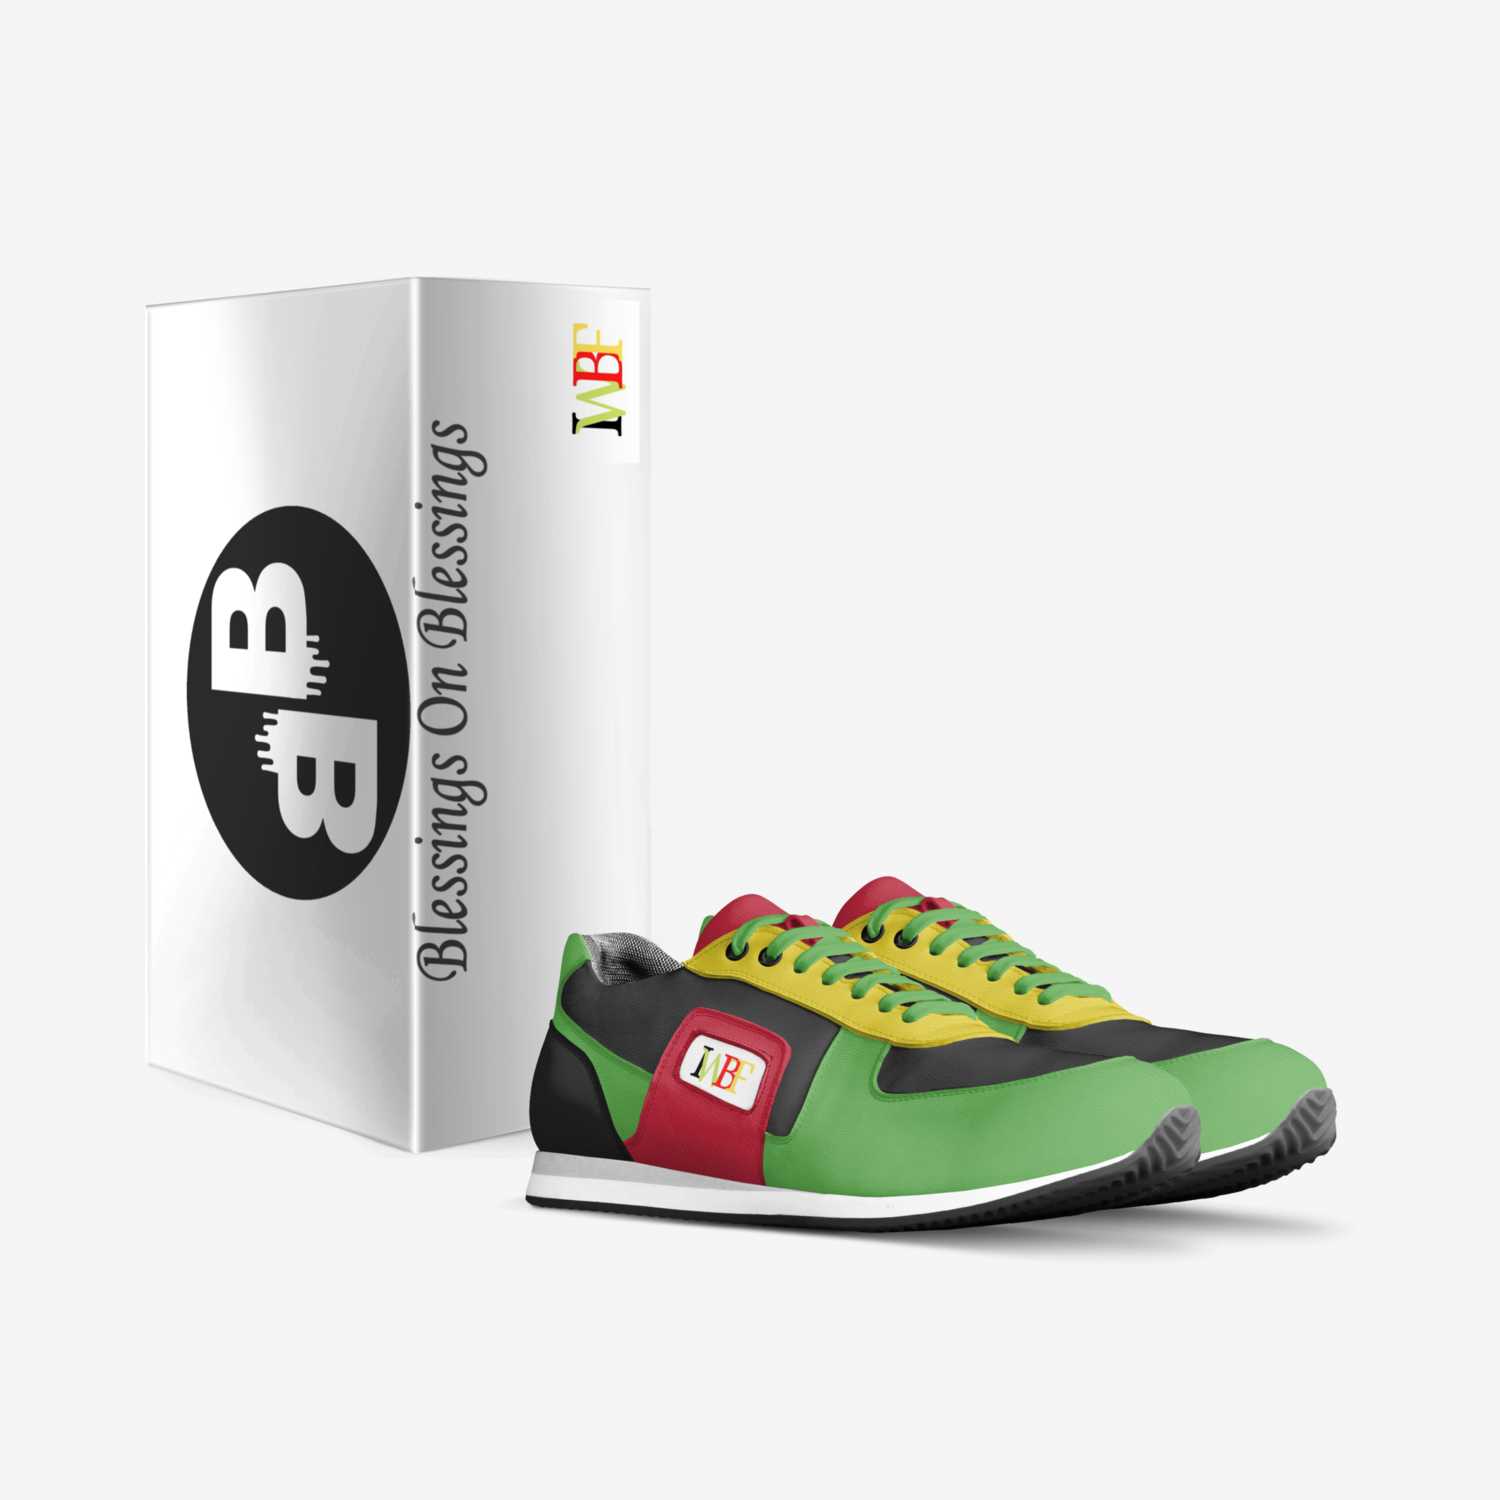 B.O.B custom made in Italy shoes by Terrell Alexander - Taylor | Box view